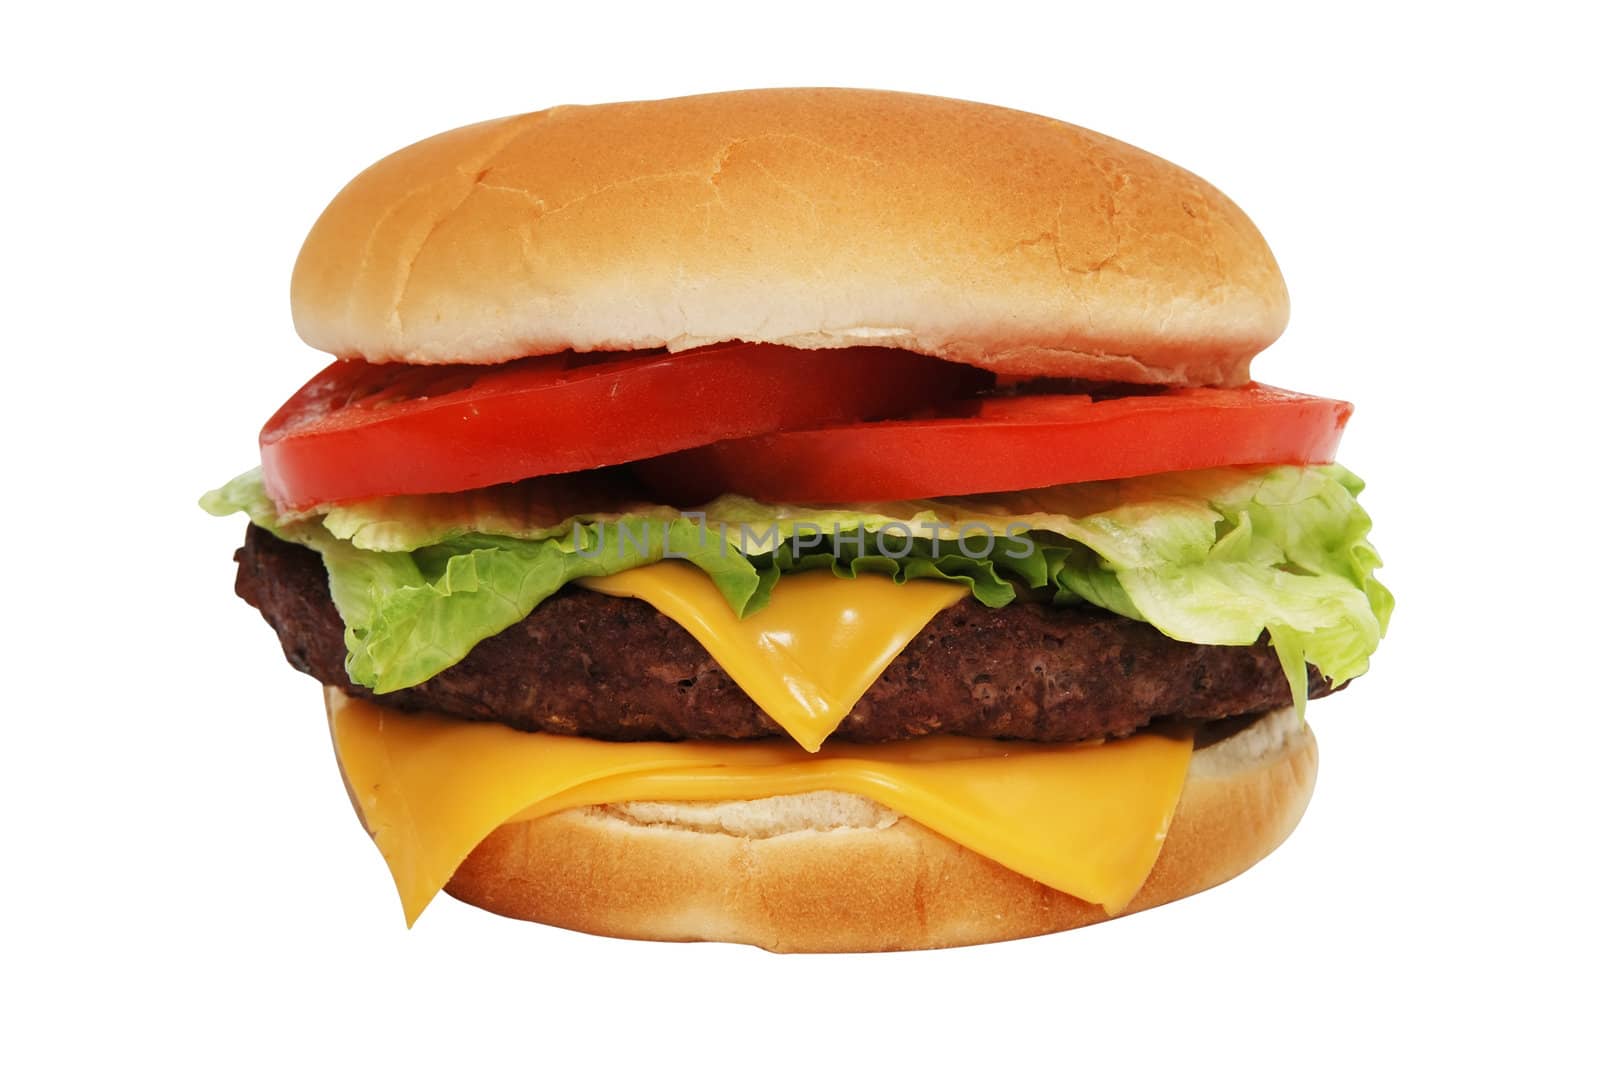 Cheeseburger isolated on white background with clipping path.